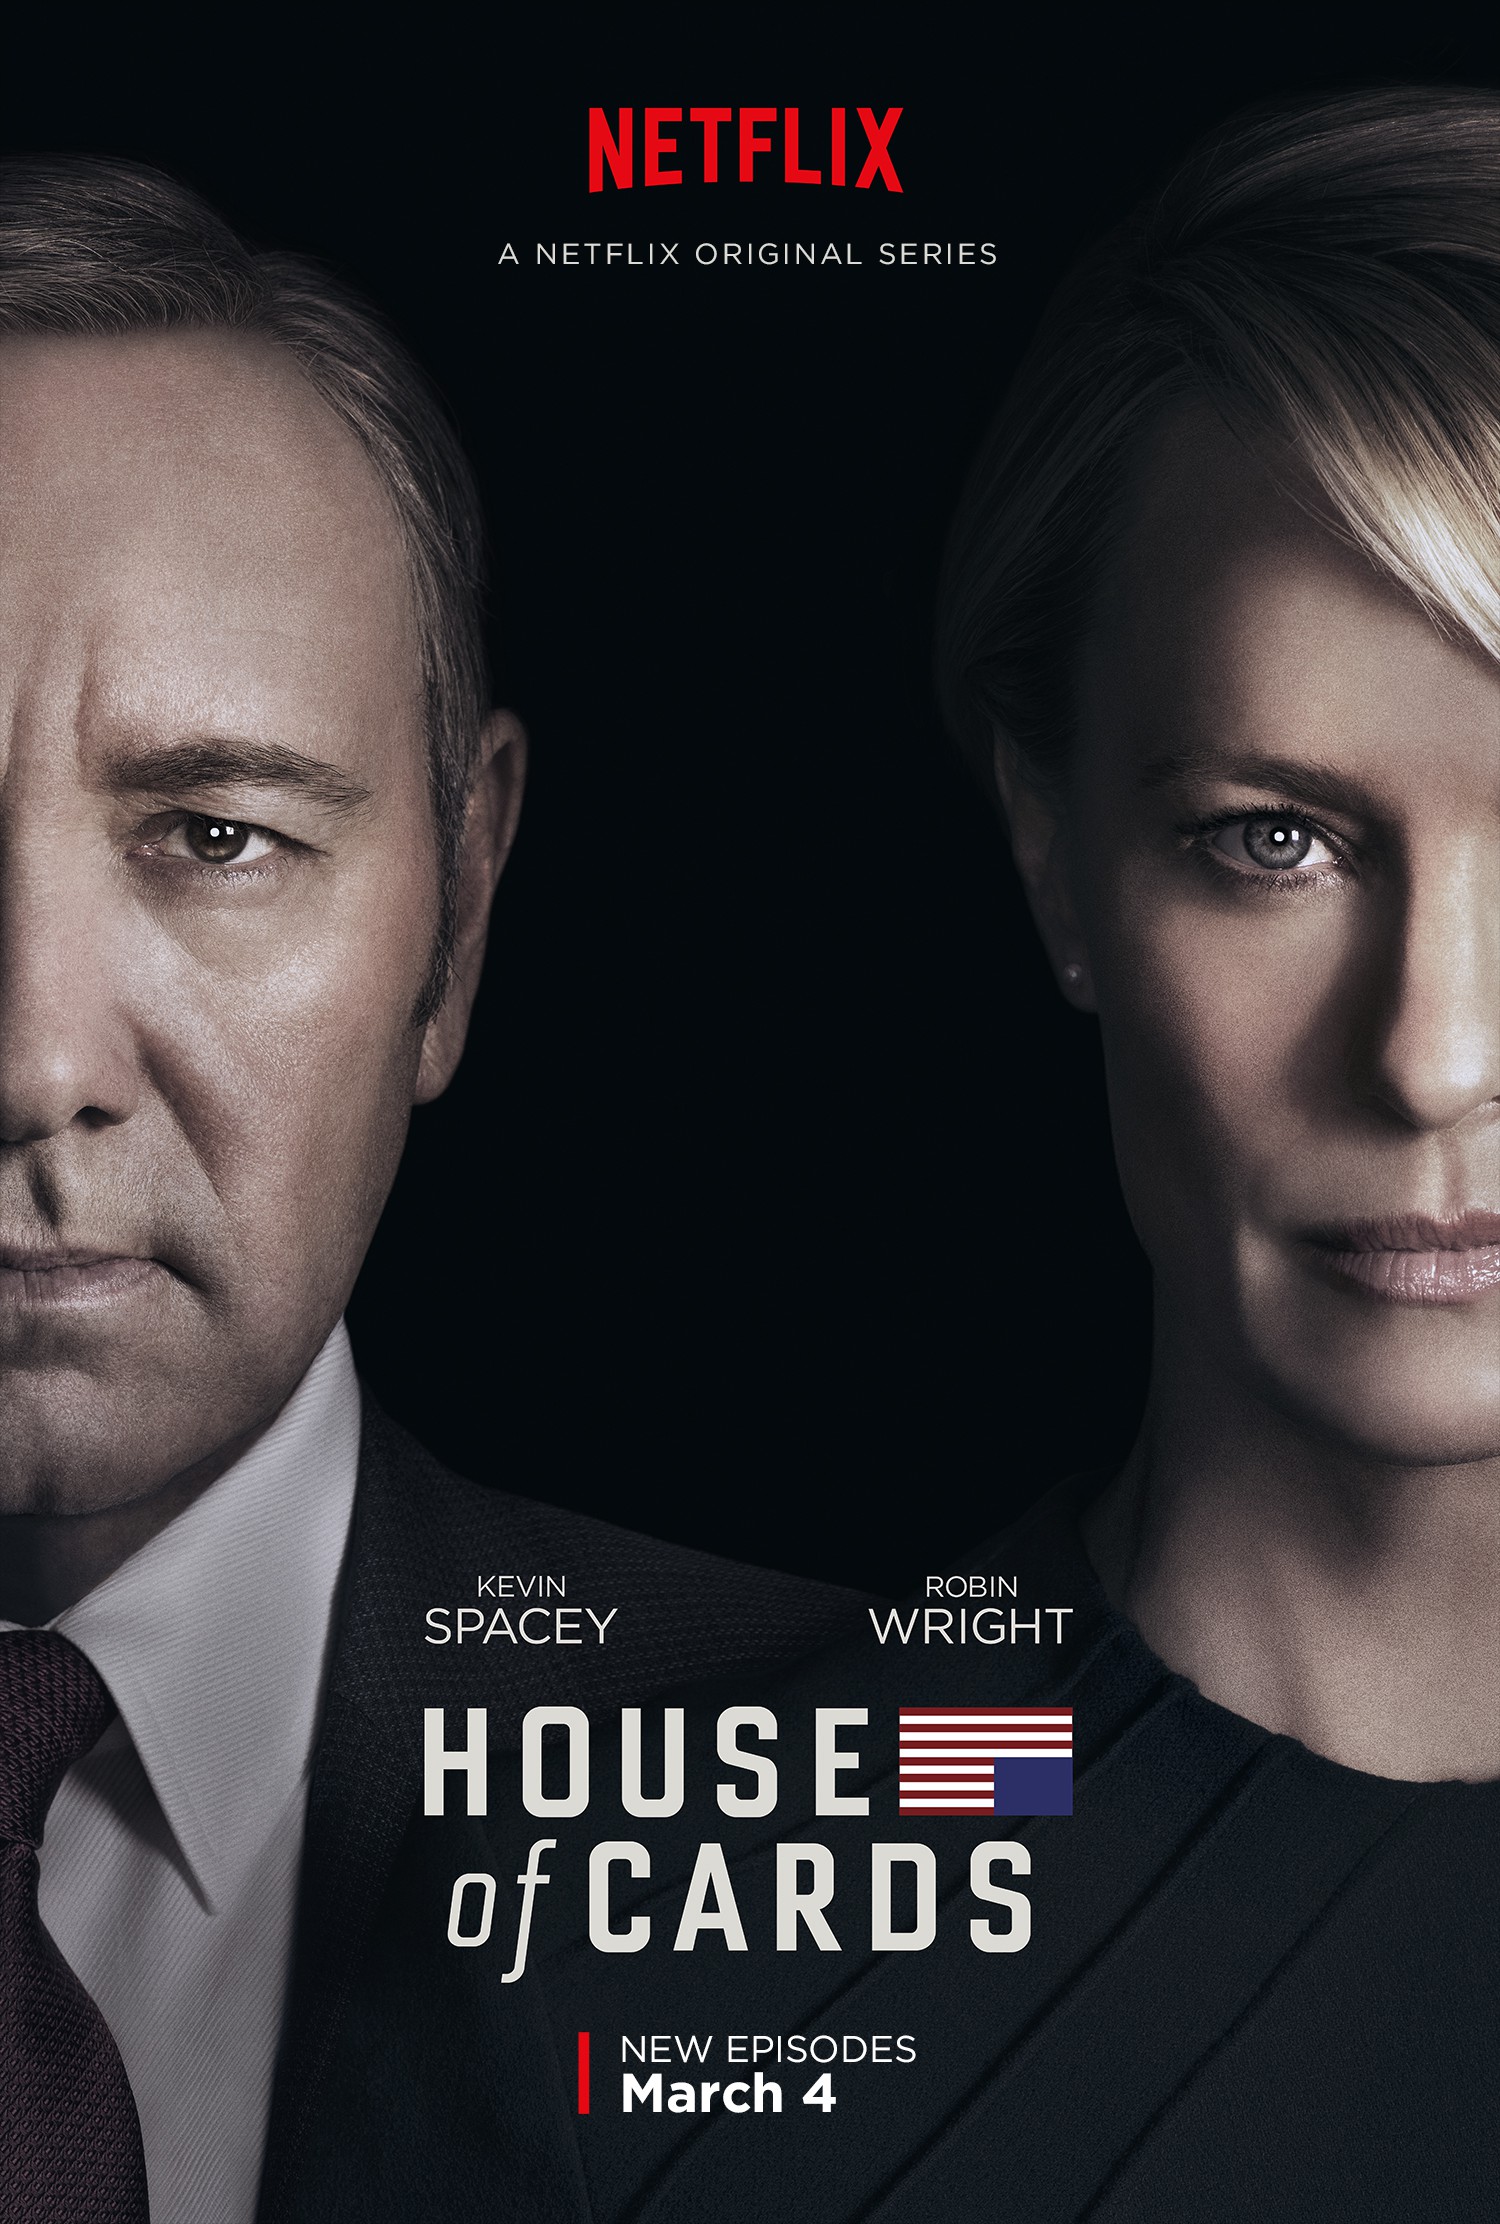 when does house of cards season 4